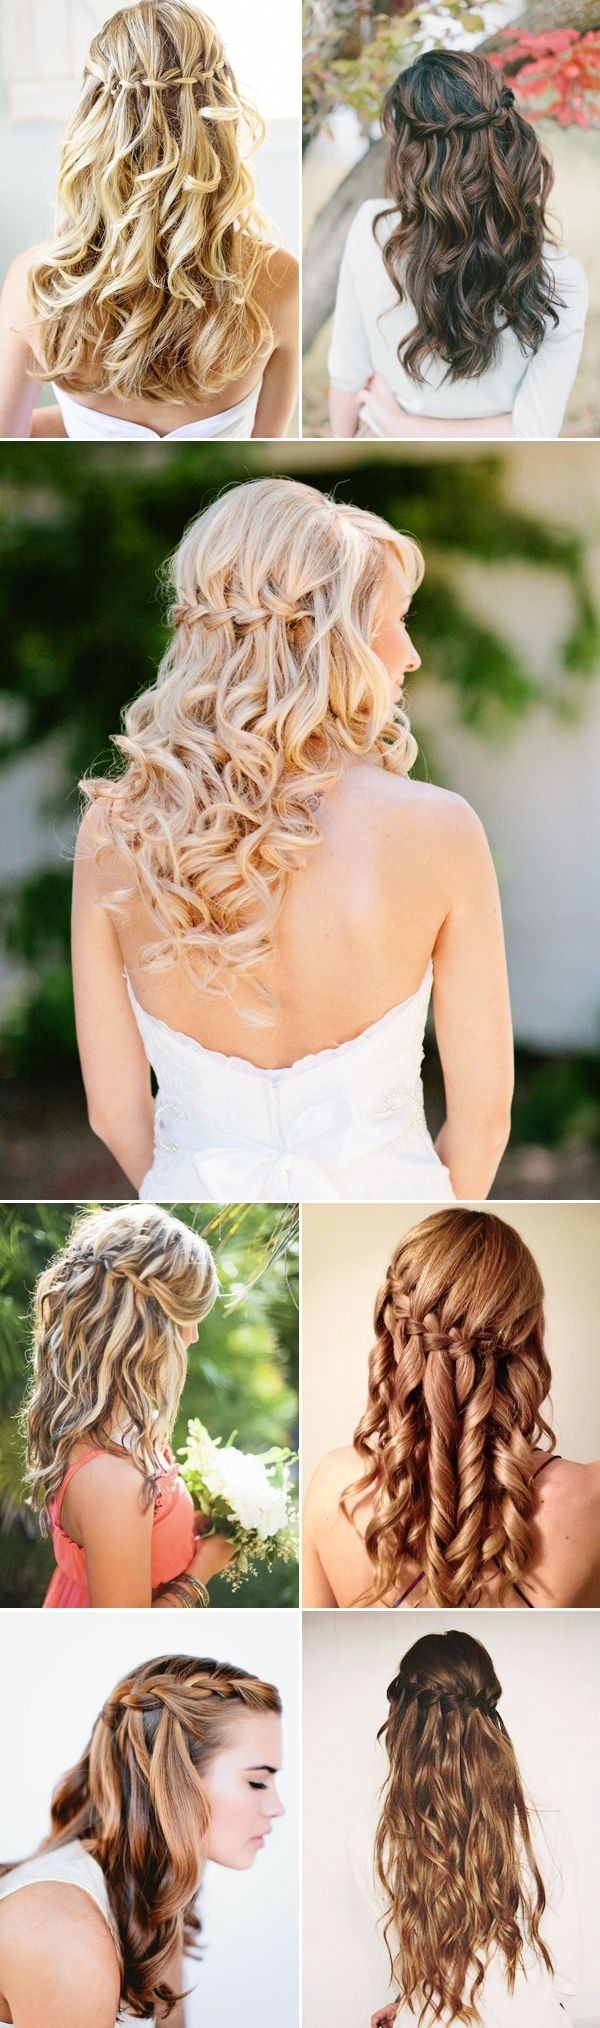 30 Hottest Bridesmaid Hairstyles For Long Hair Popular